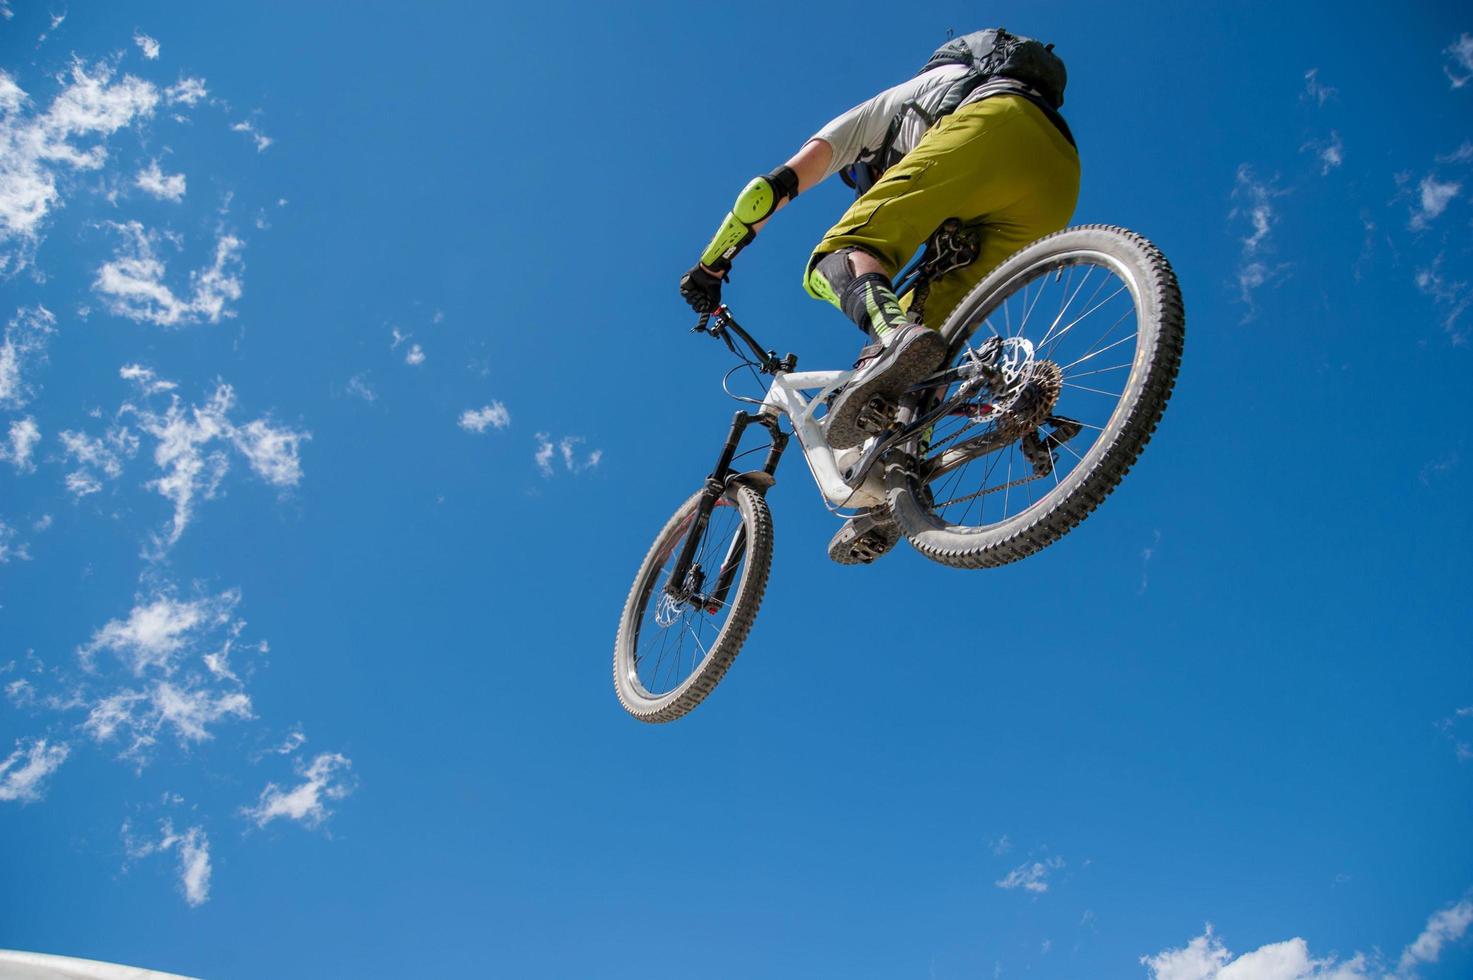 Livigno Italy 2014Jump with the bicycle photo